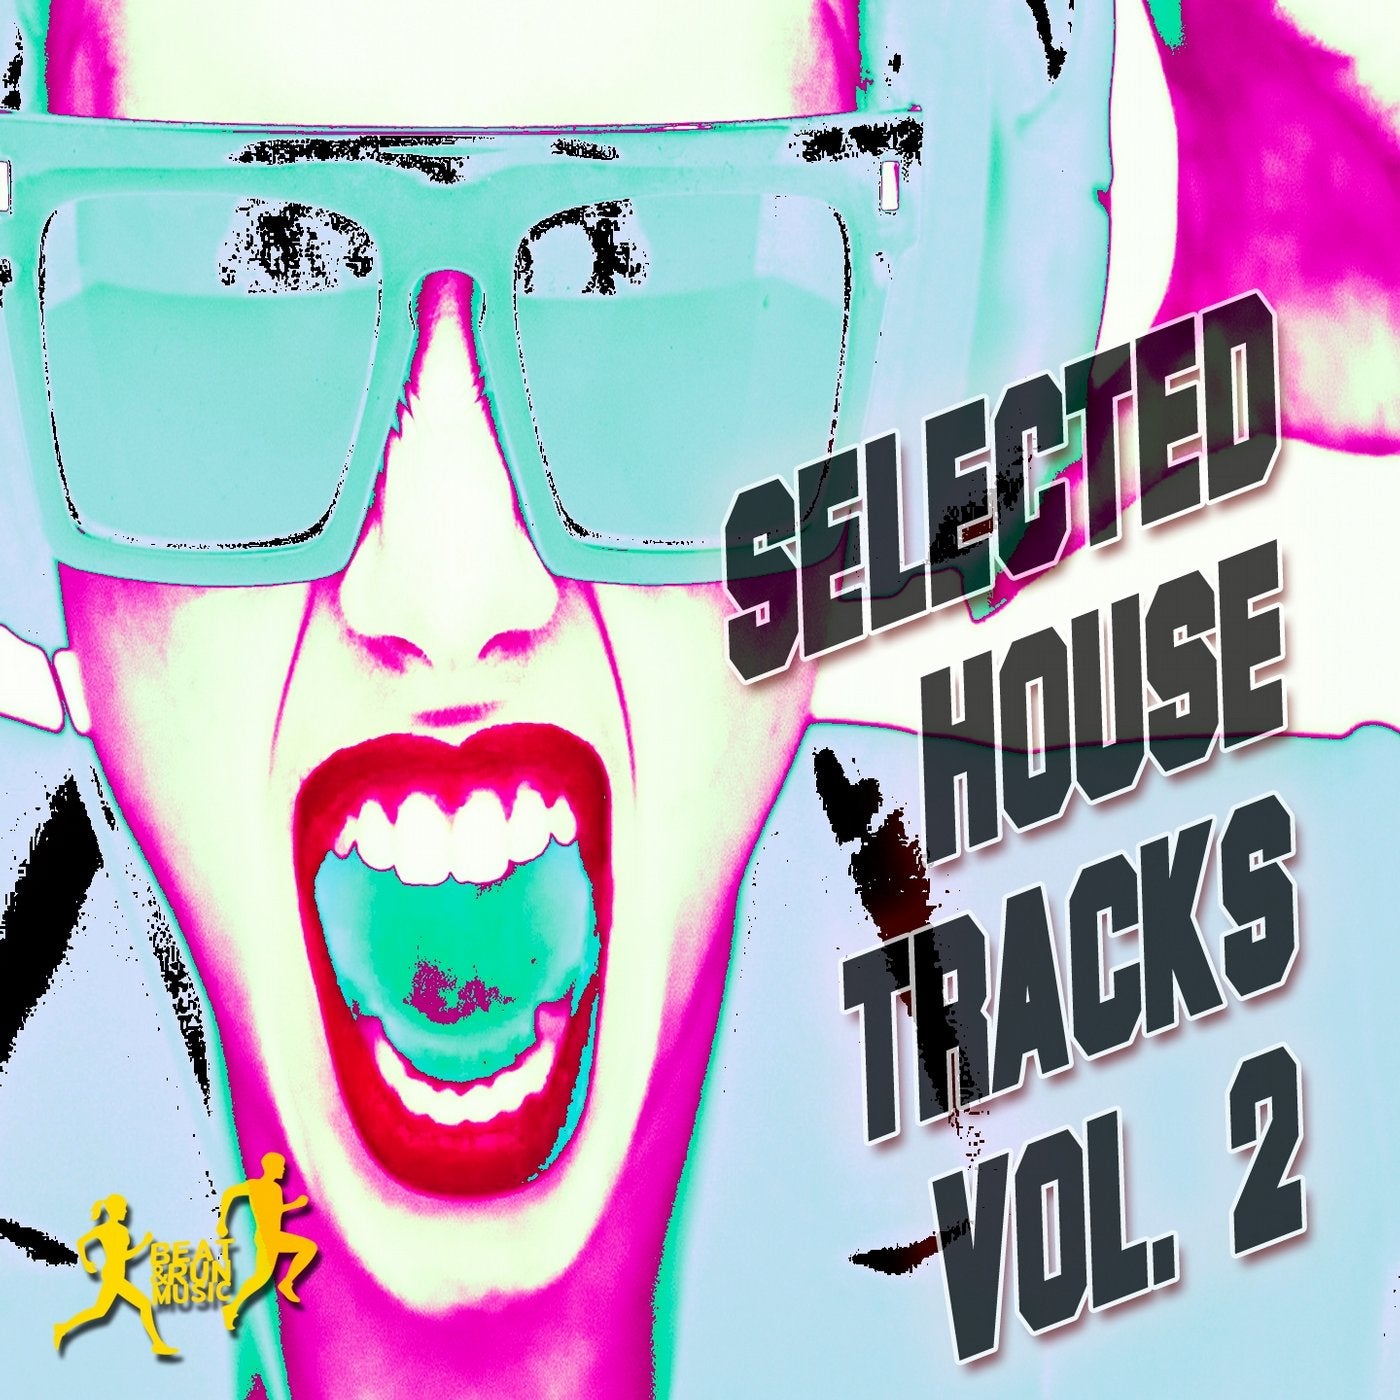 Selected House Tracks, Vol. 2